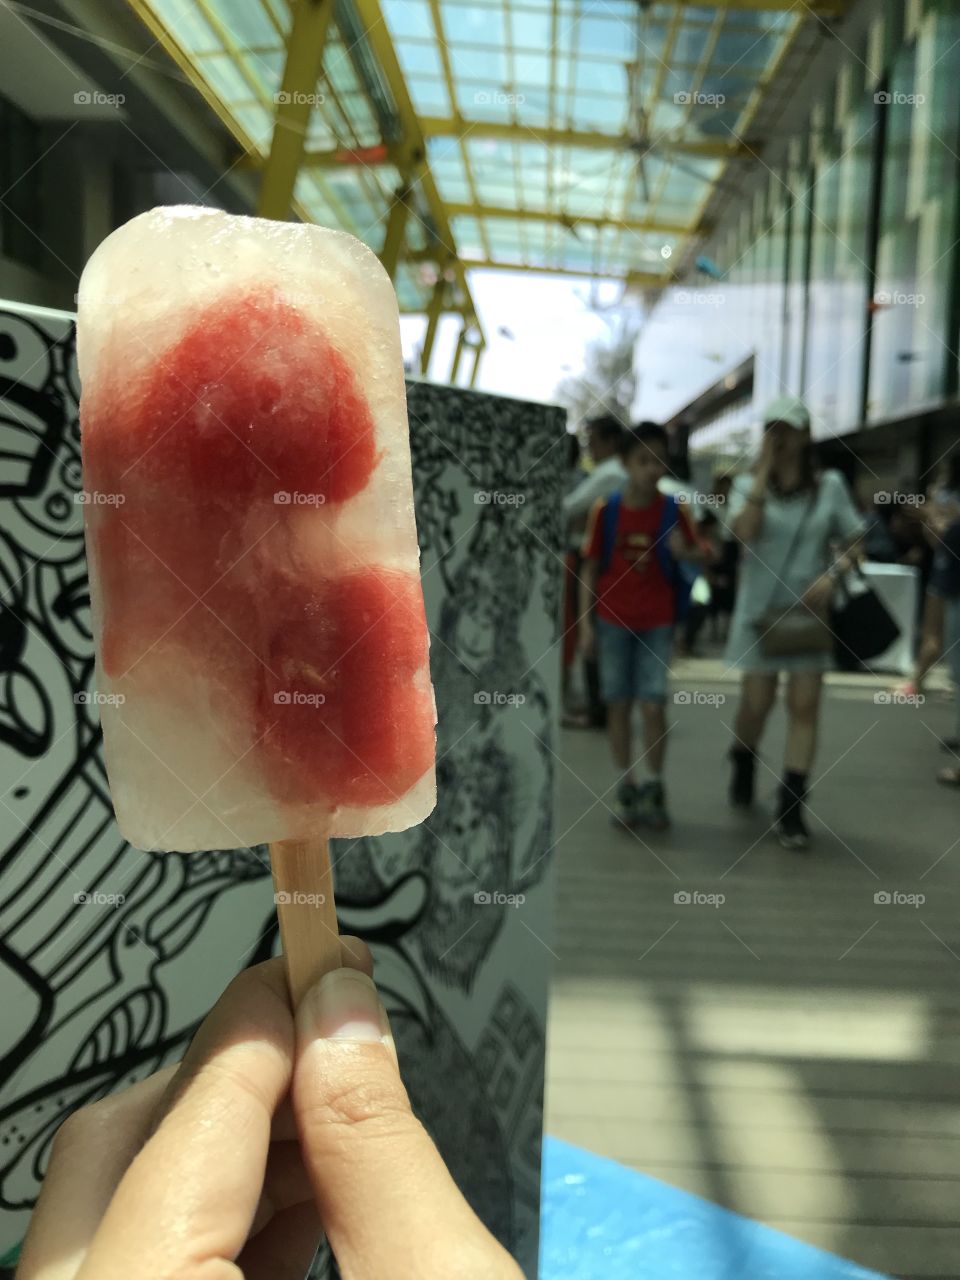 Watermelon popsicle at The Walk